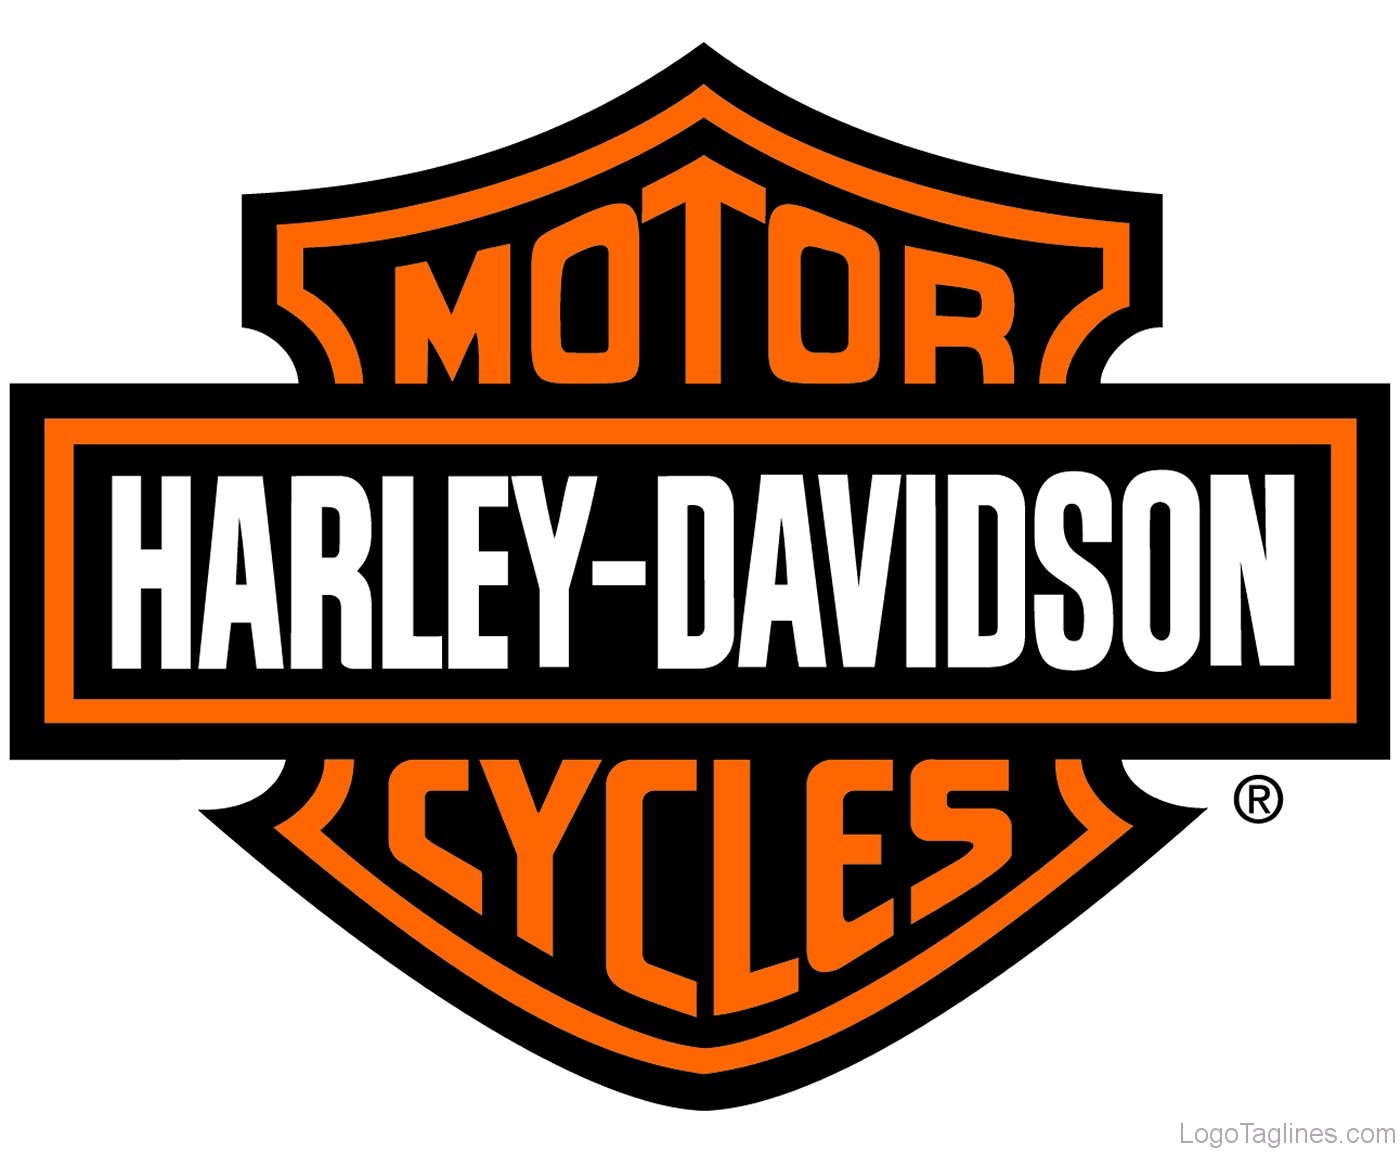 Harley Davidson Repairs In The Chester Area